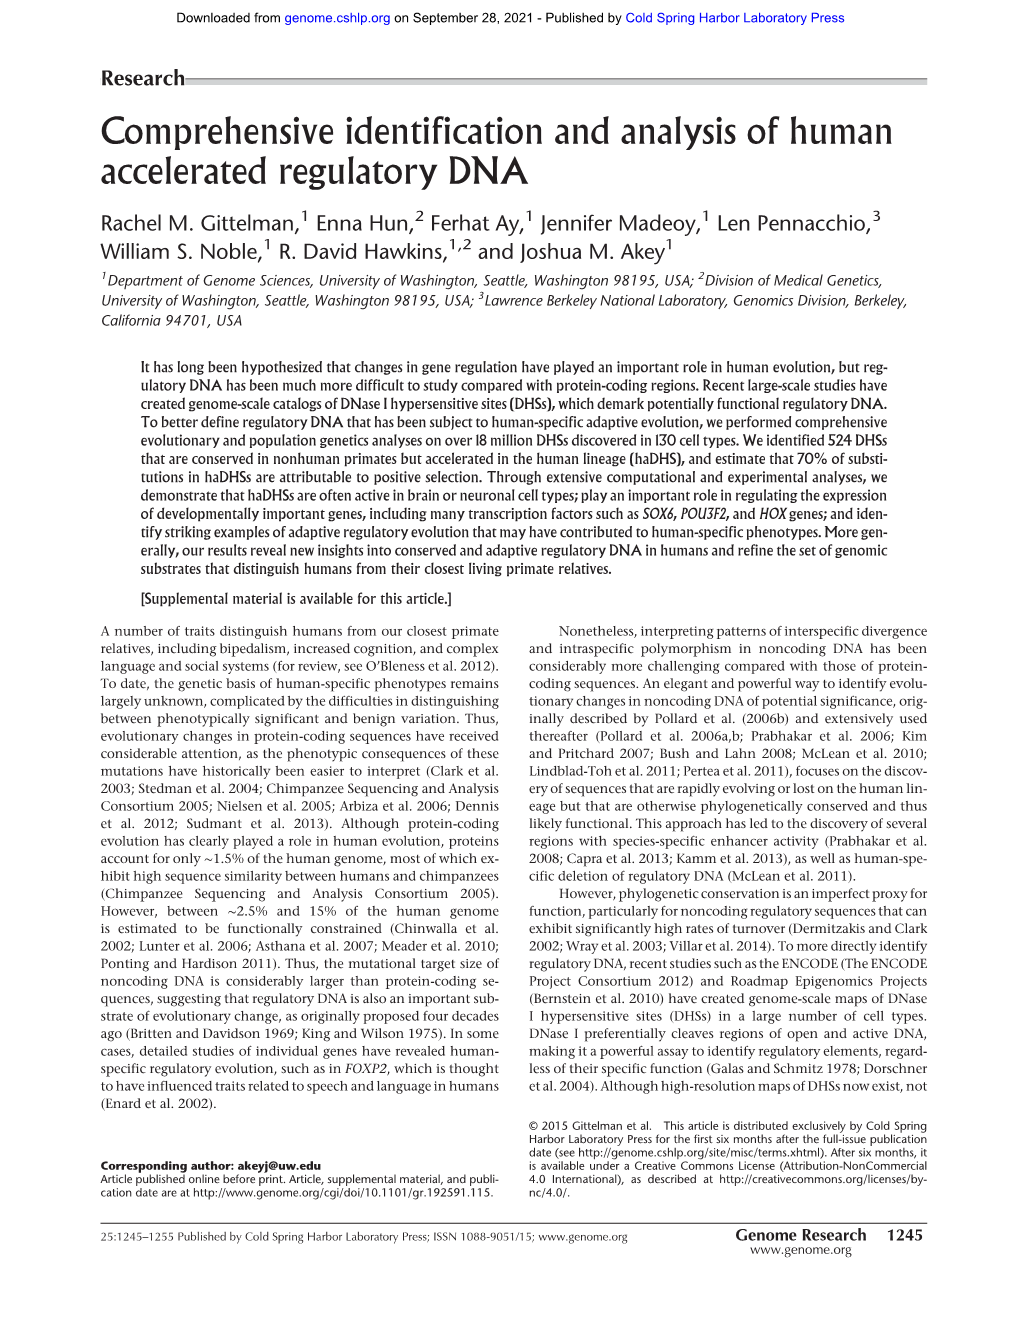 Comprehensive Identification and Analysis of Human Accelerated Regulatory DNA